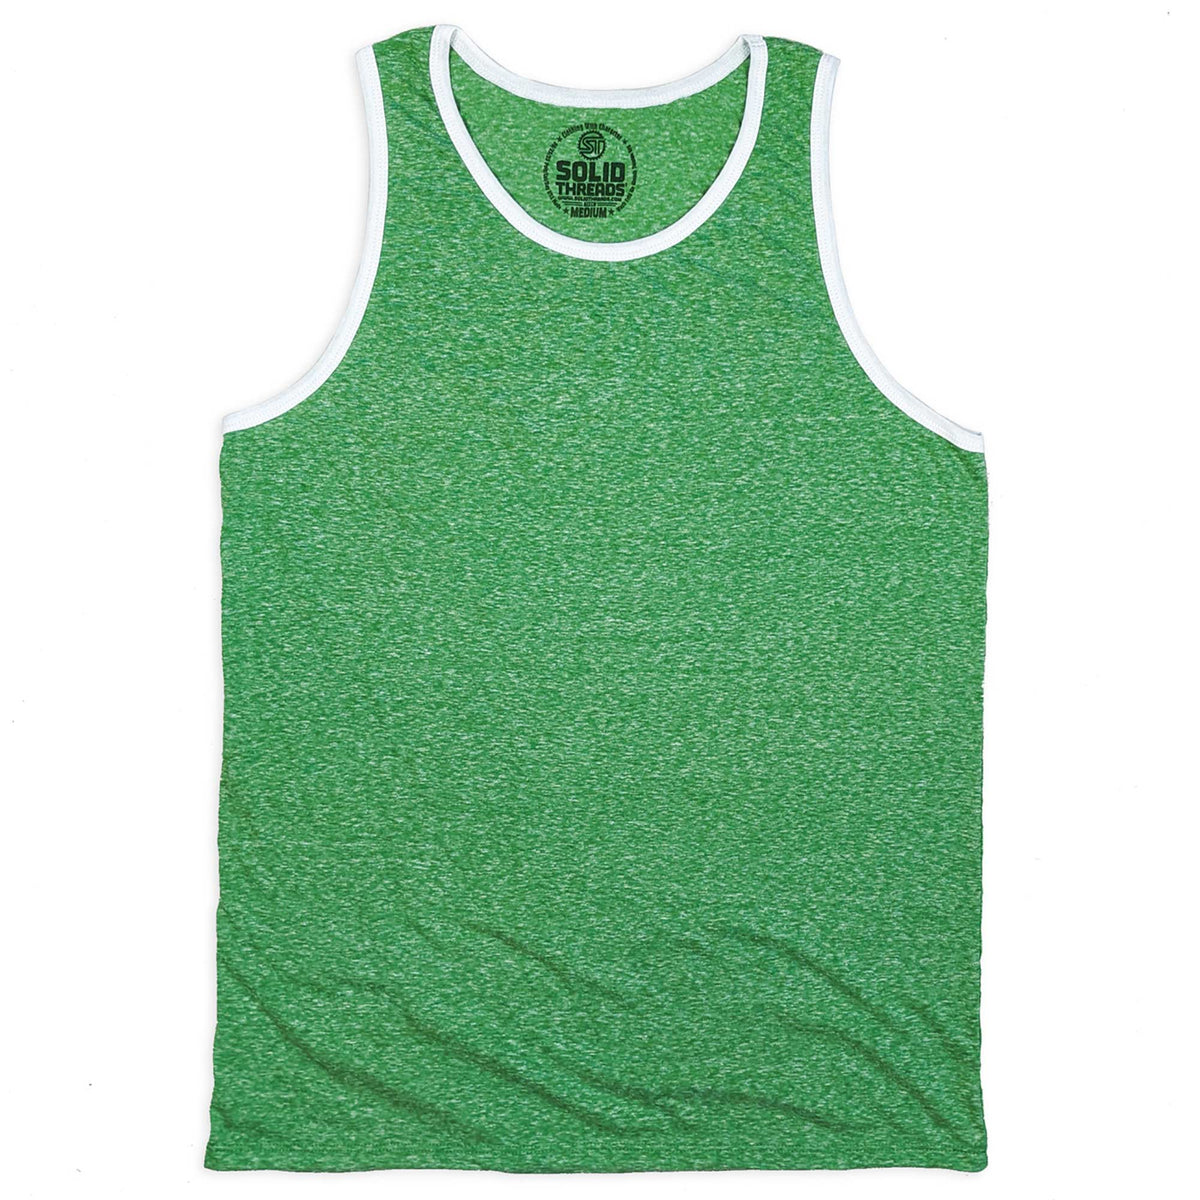 Performance At Least 20% Sustainable Material Tank Tops